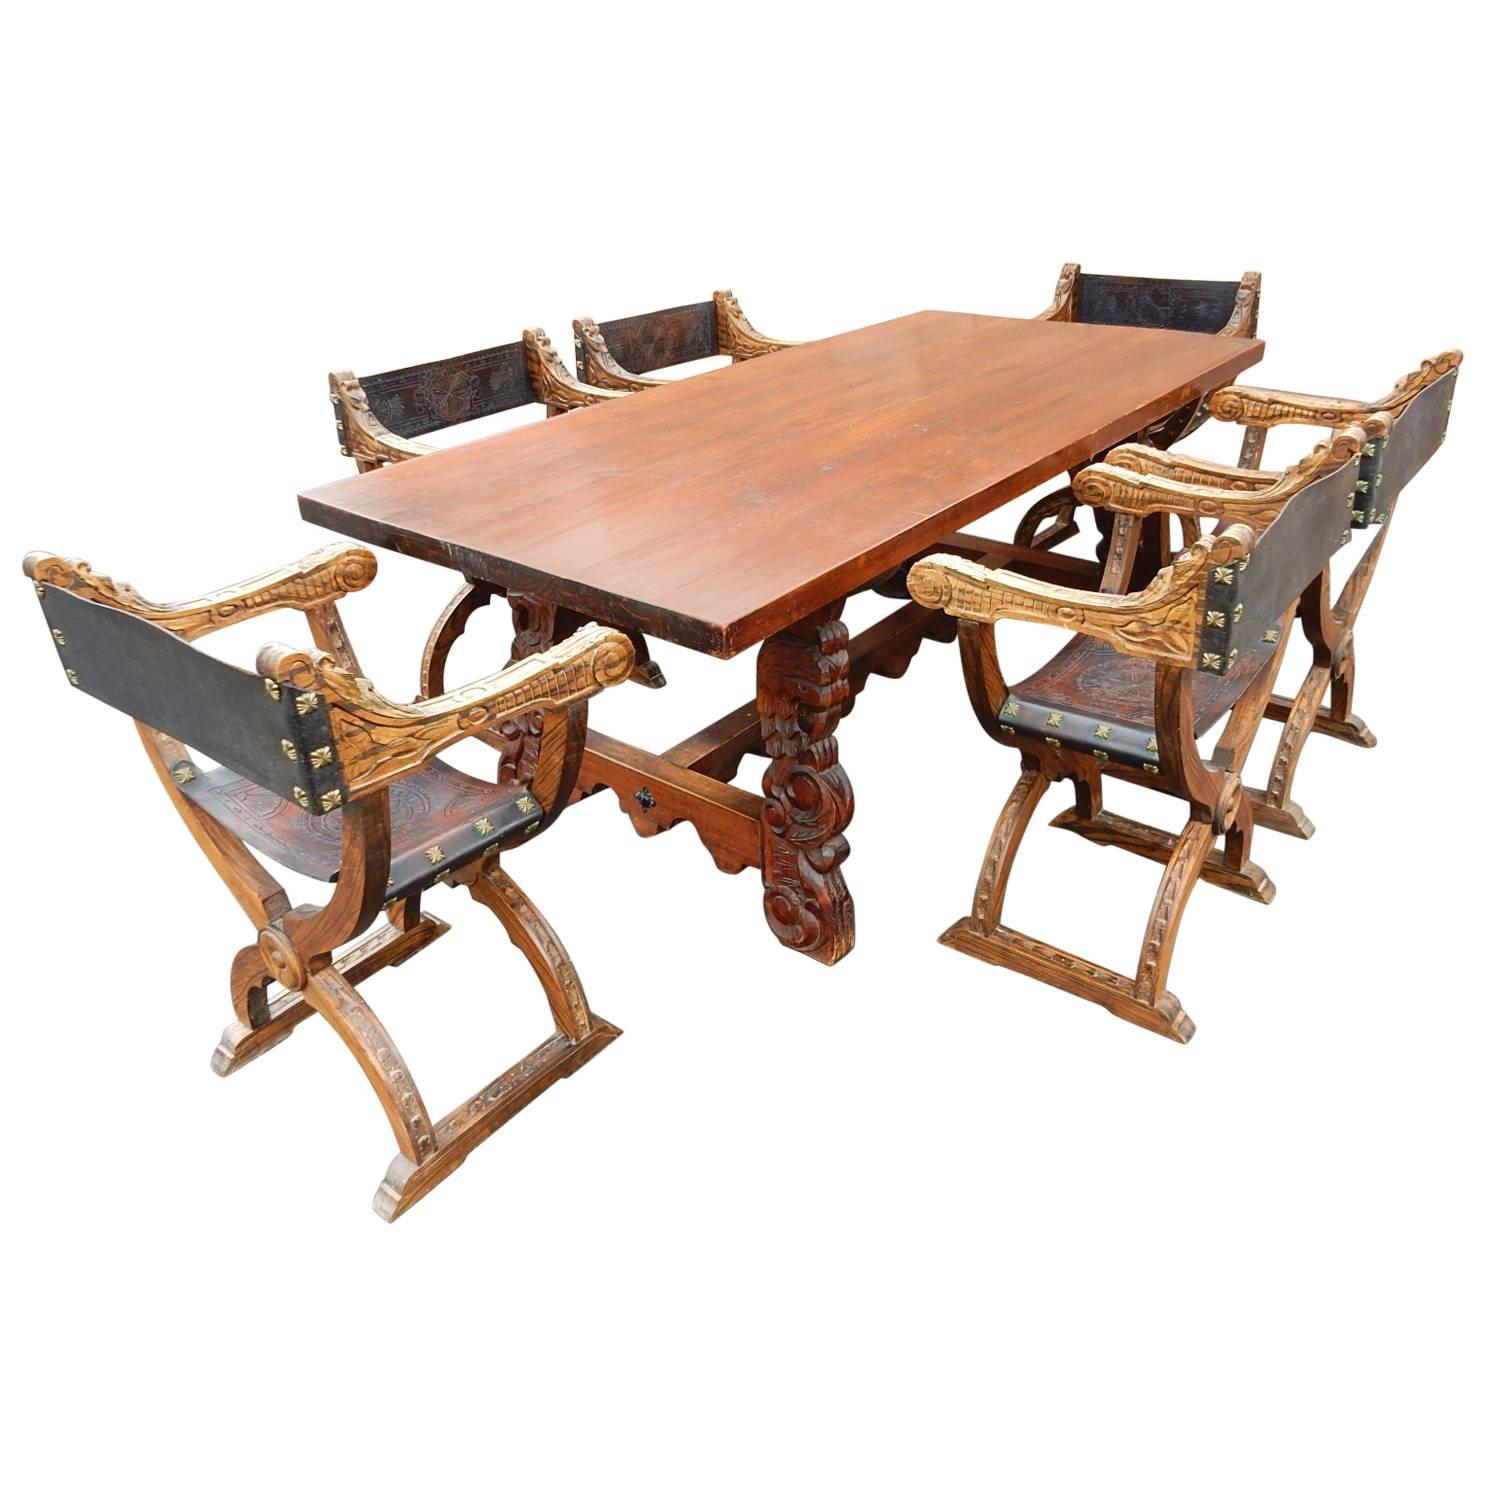 Spanish Colonial Dining Table with Six Elaborate Carved Wood and Leather Chairs